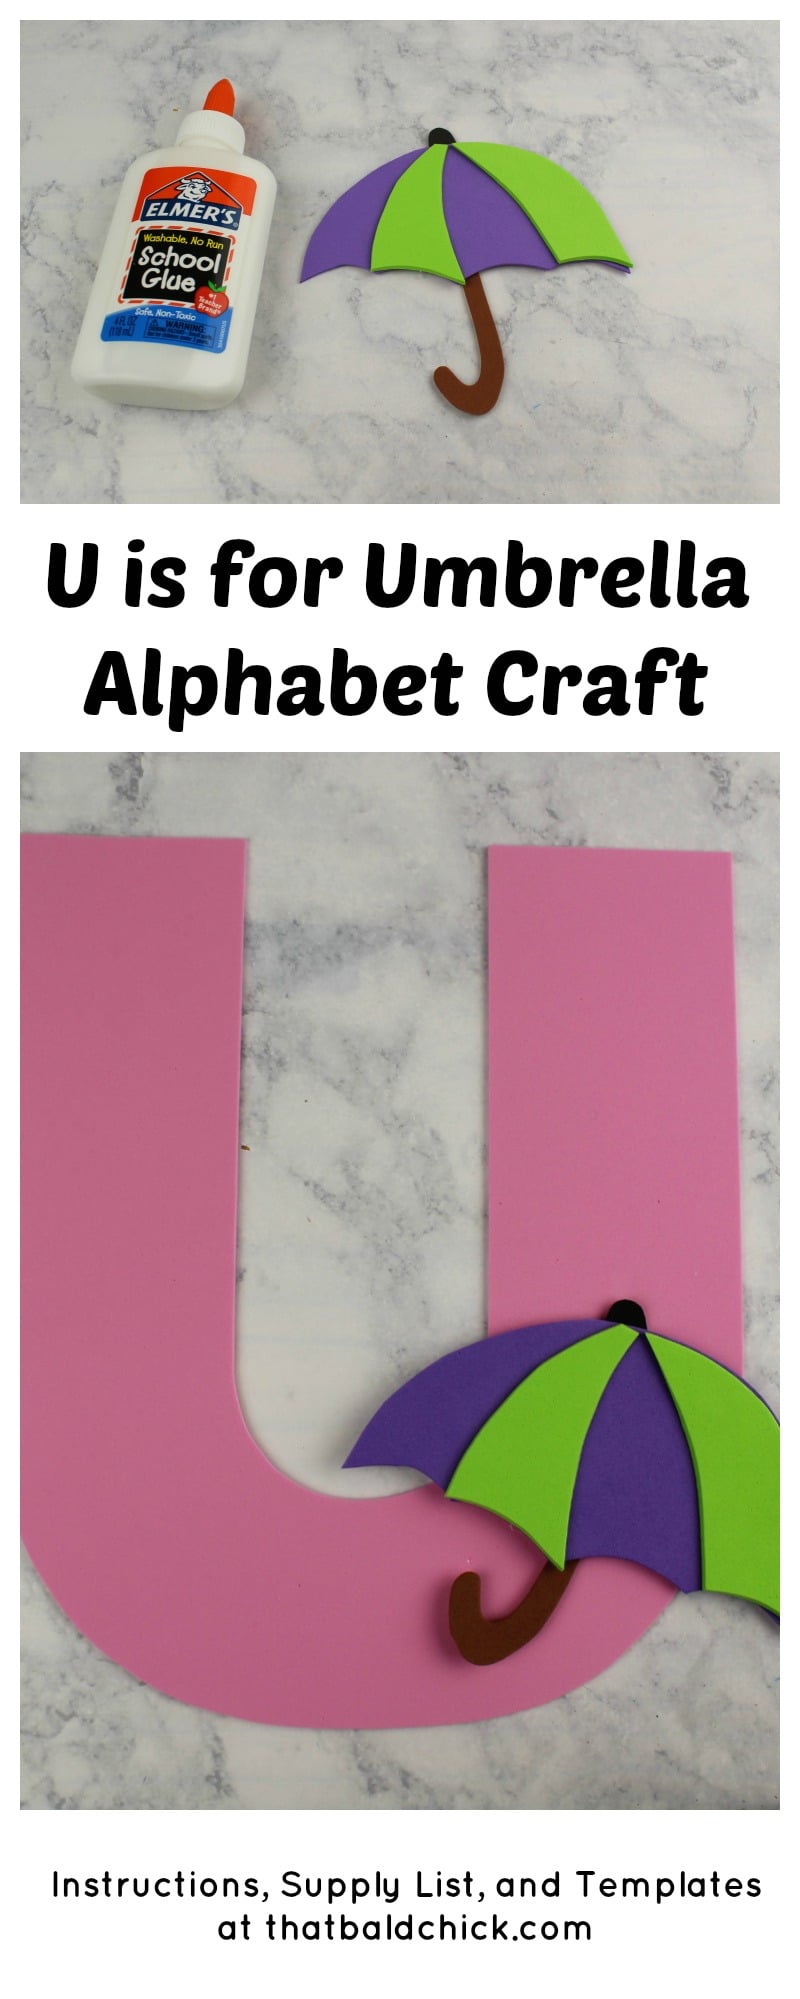 Get the supply list, instructions, and templates for this U is for Umbrella Alphabet Craft today! #homeschool #teacher #alphabet #abcs #lotw #free #printable